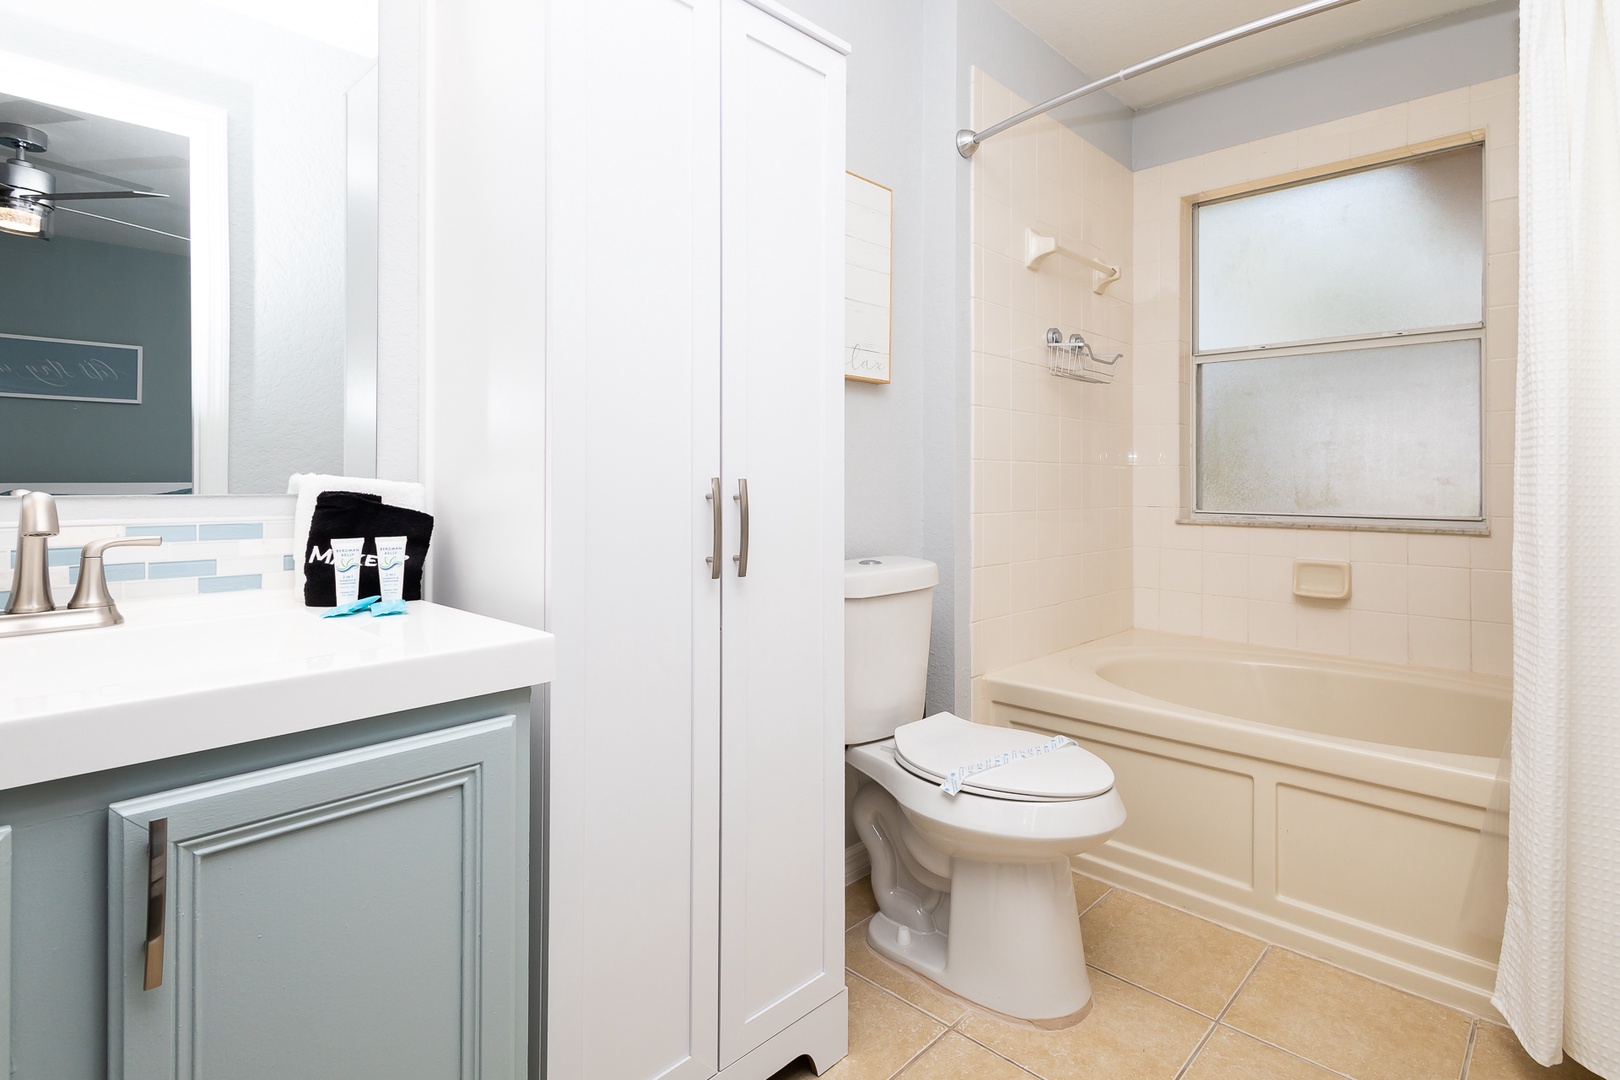 This ensuite bathroom features a single vanity & shower/tub combo